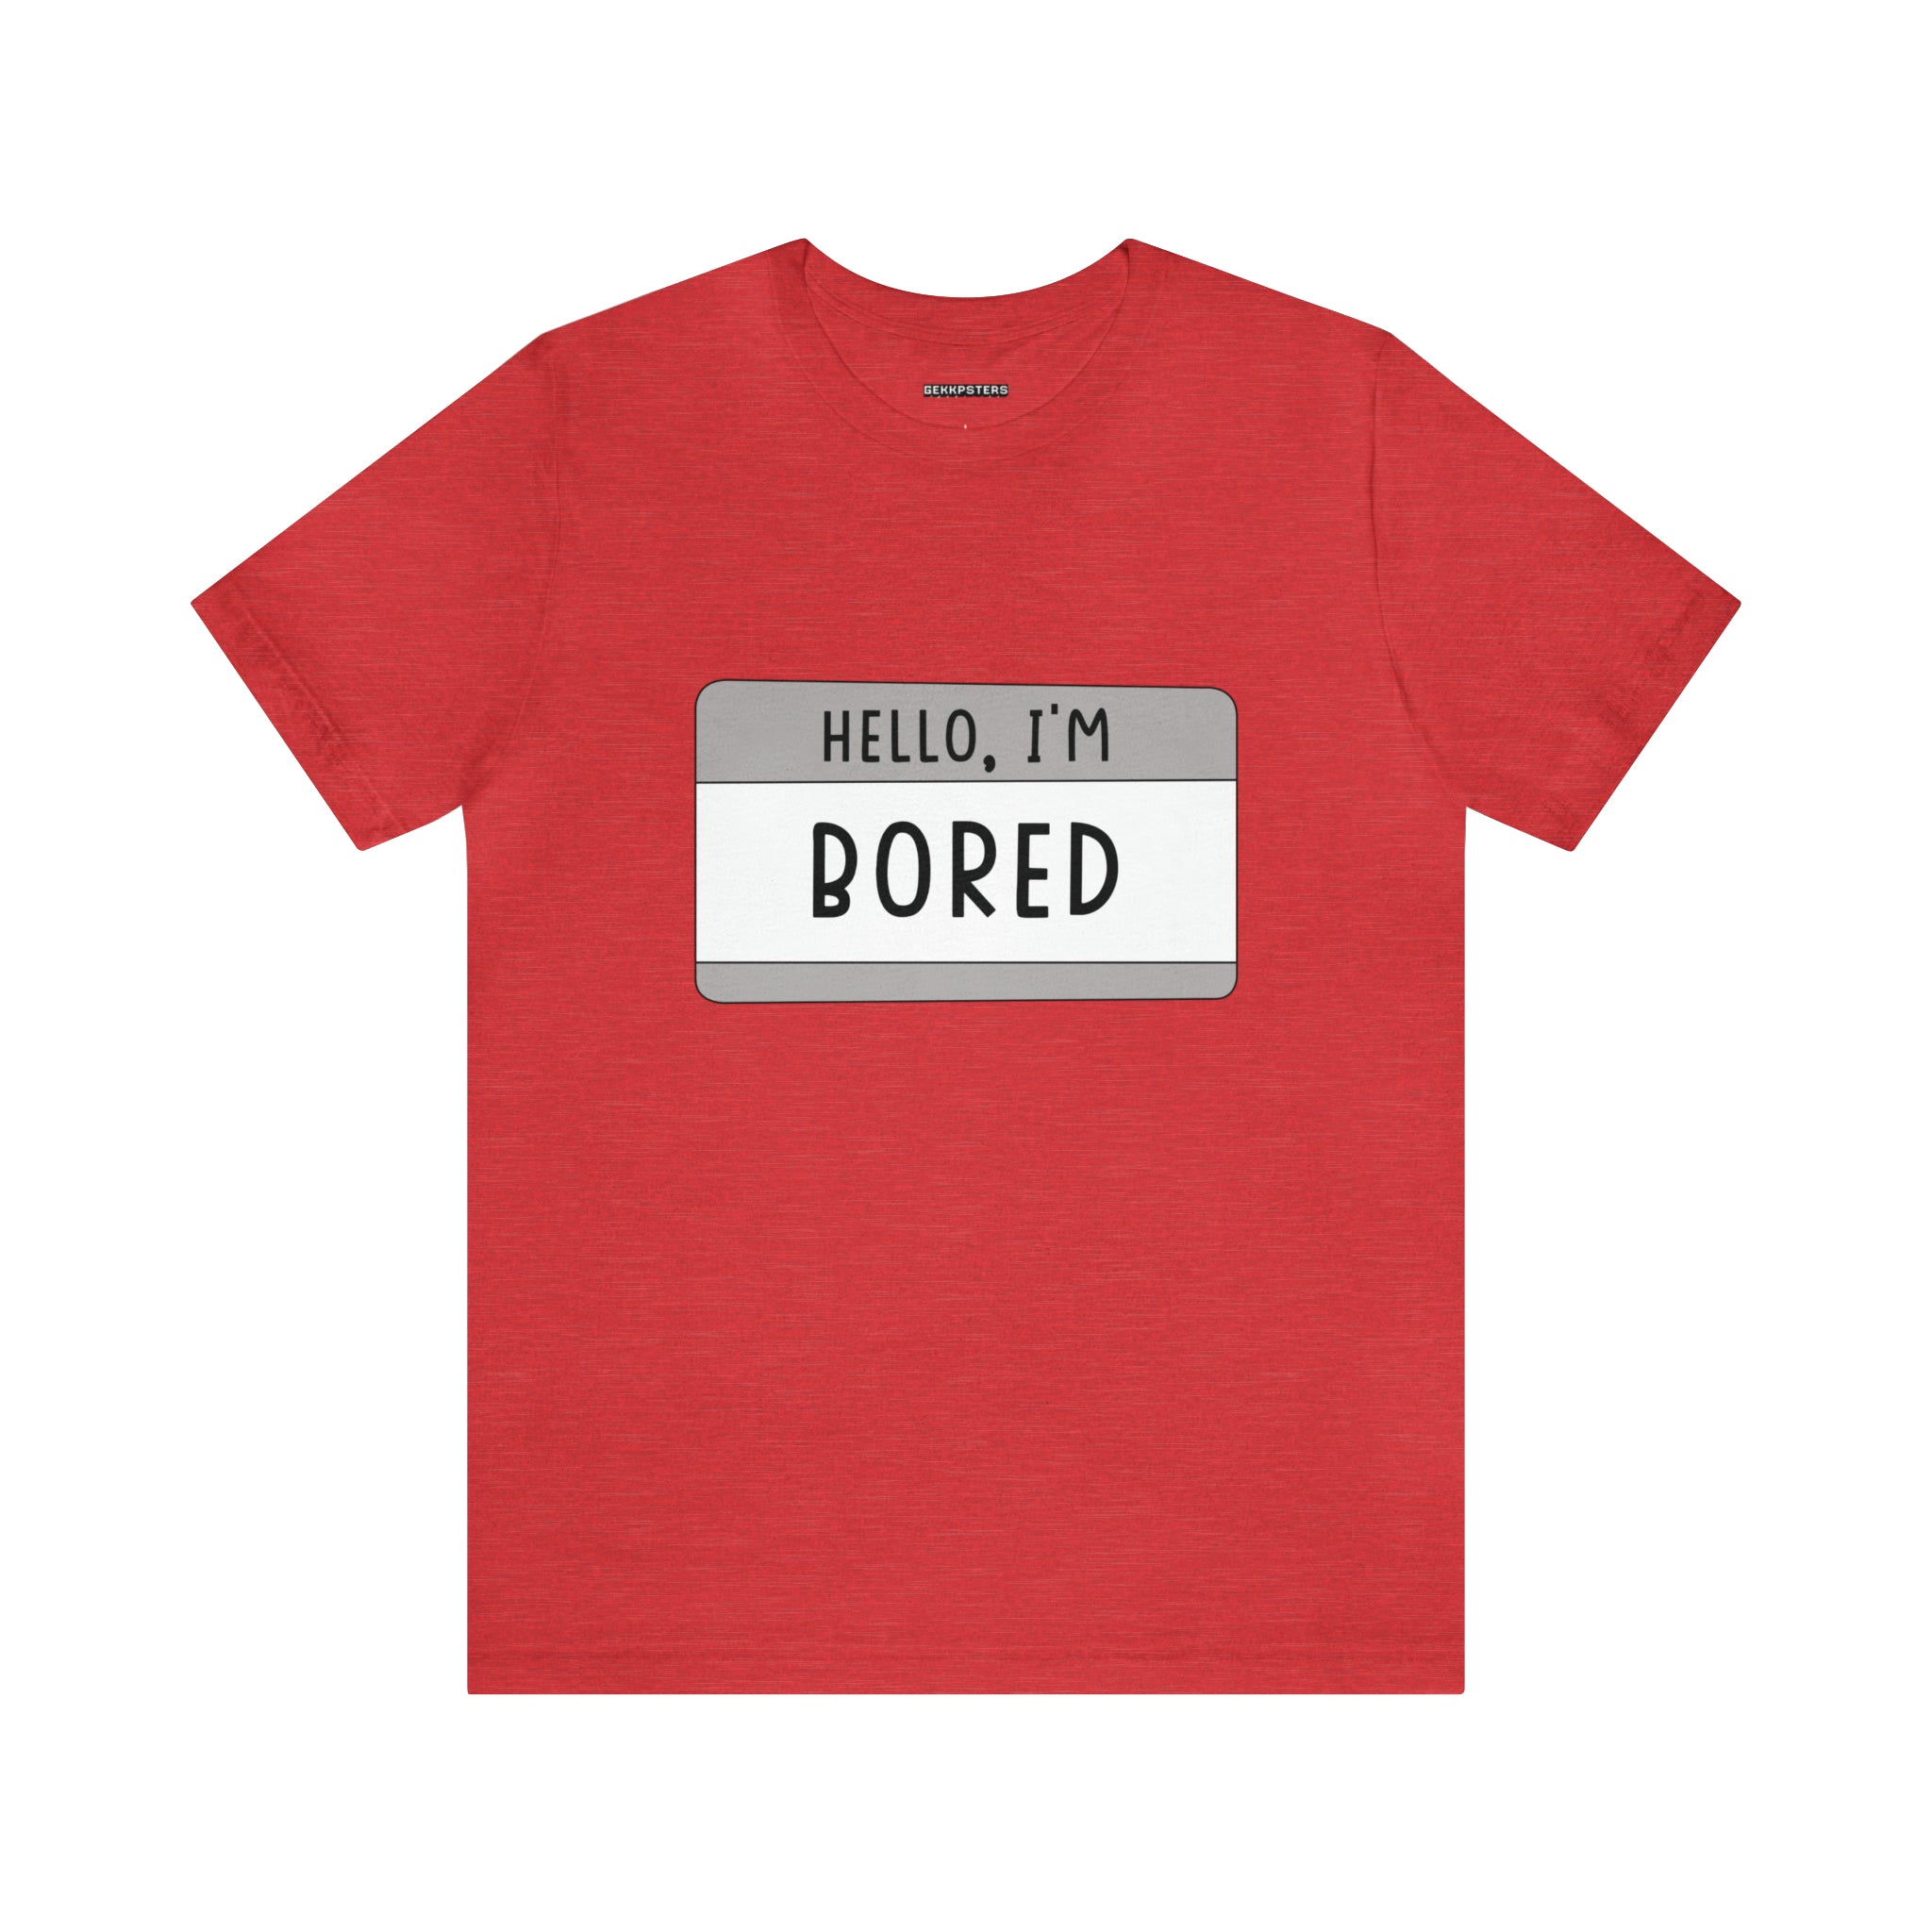 Feeling bored? Shake things up with the "Hello, I'm Board" tee-shirt that builds character!